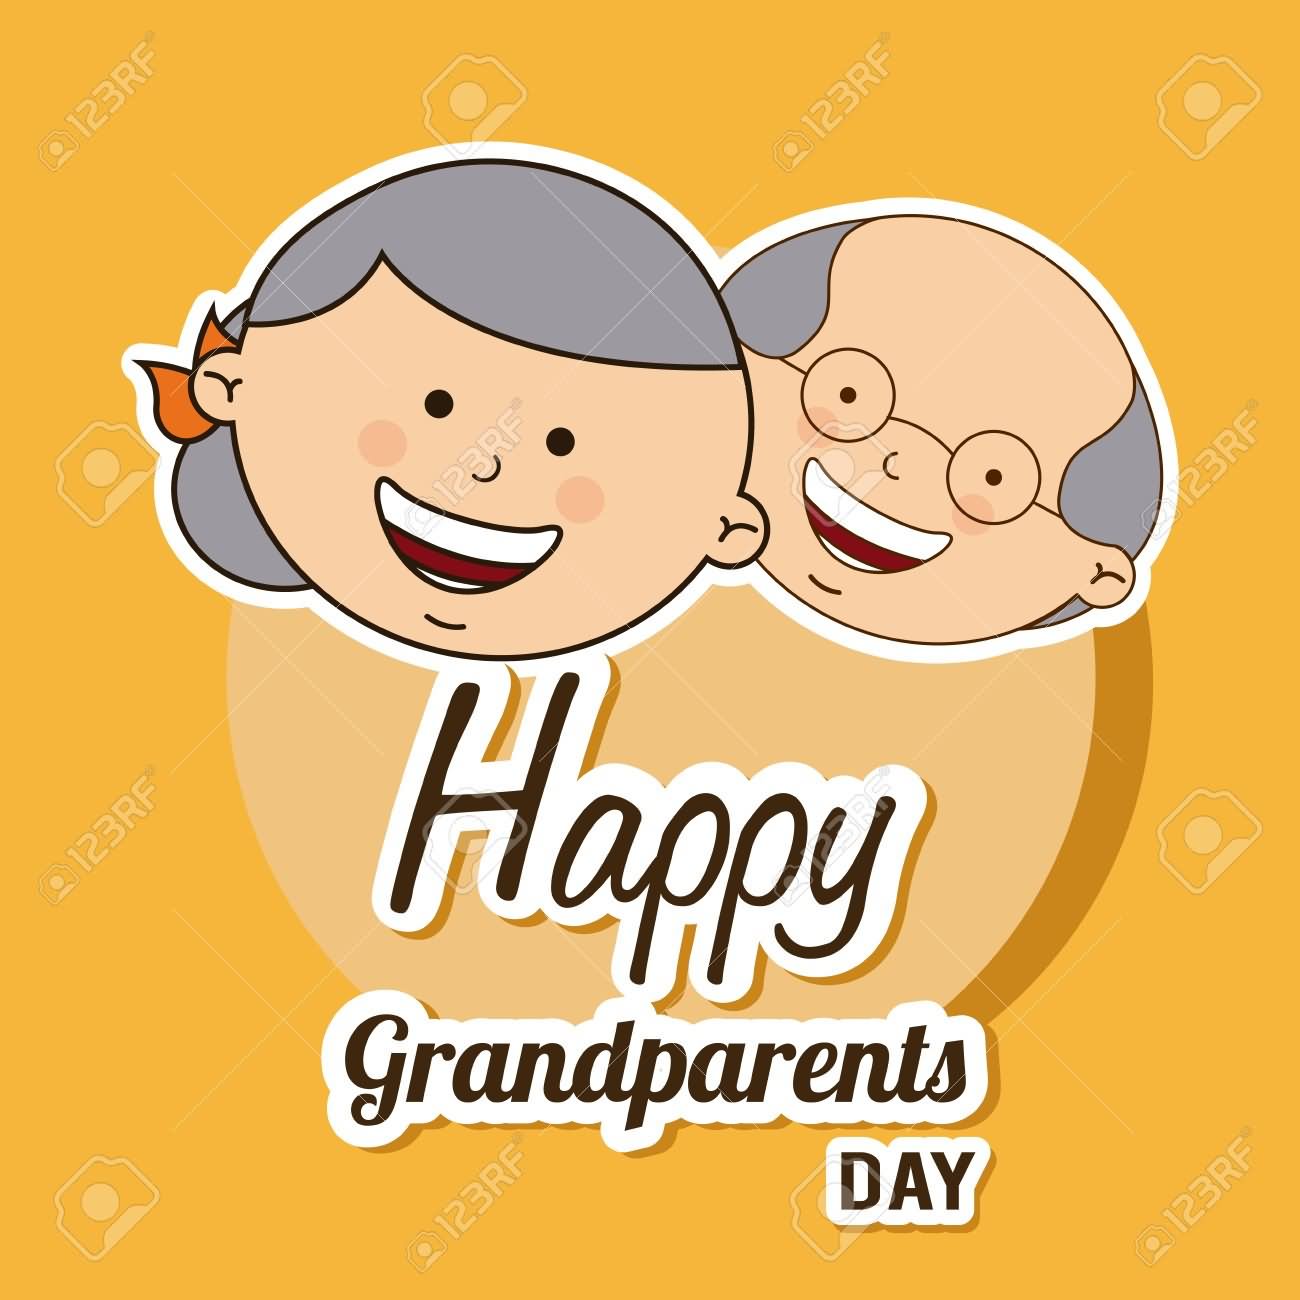 Happy Grandparents Day Greeting Card Picture